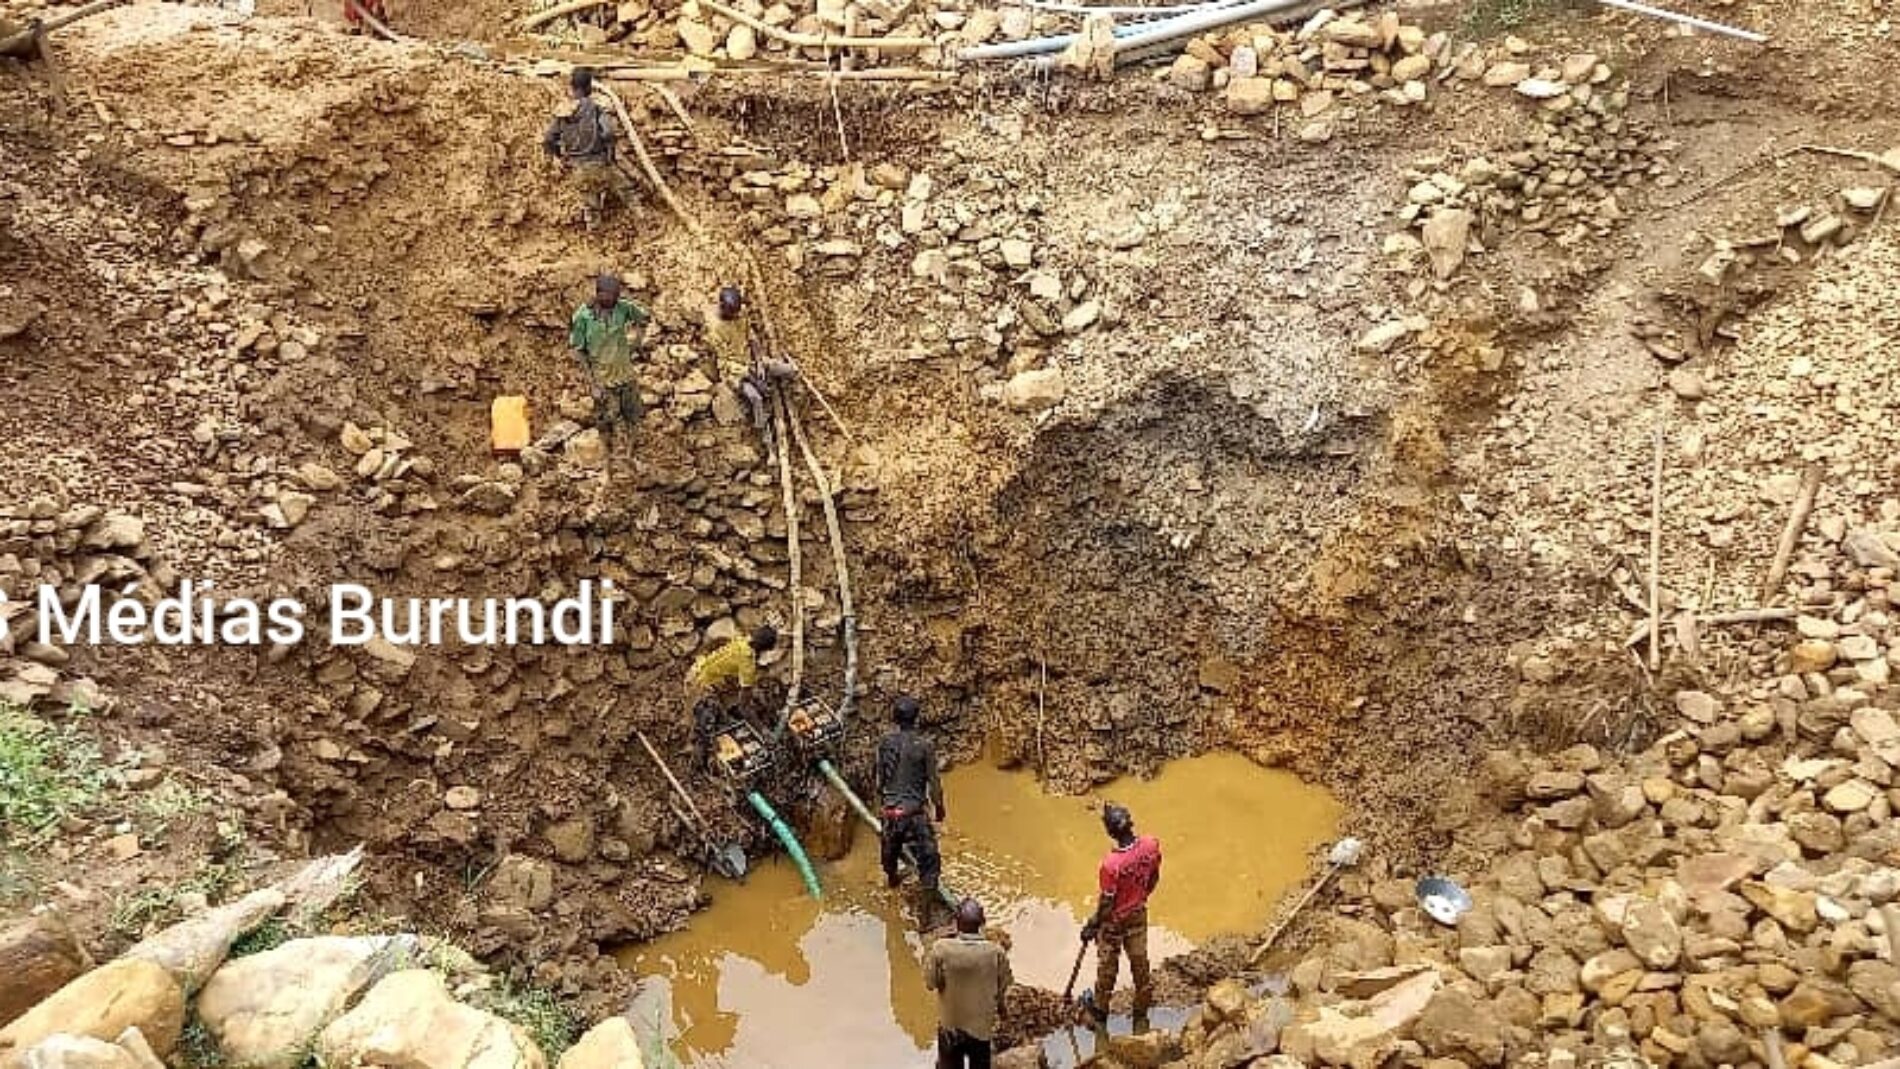 Mabayi : 15 clandestine gold miners died in an artisanal mine